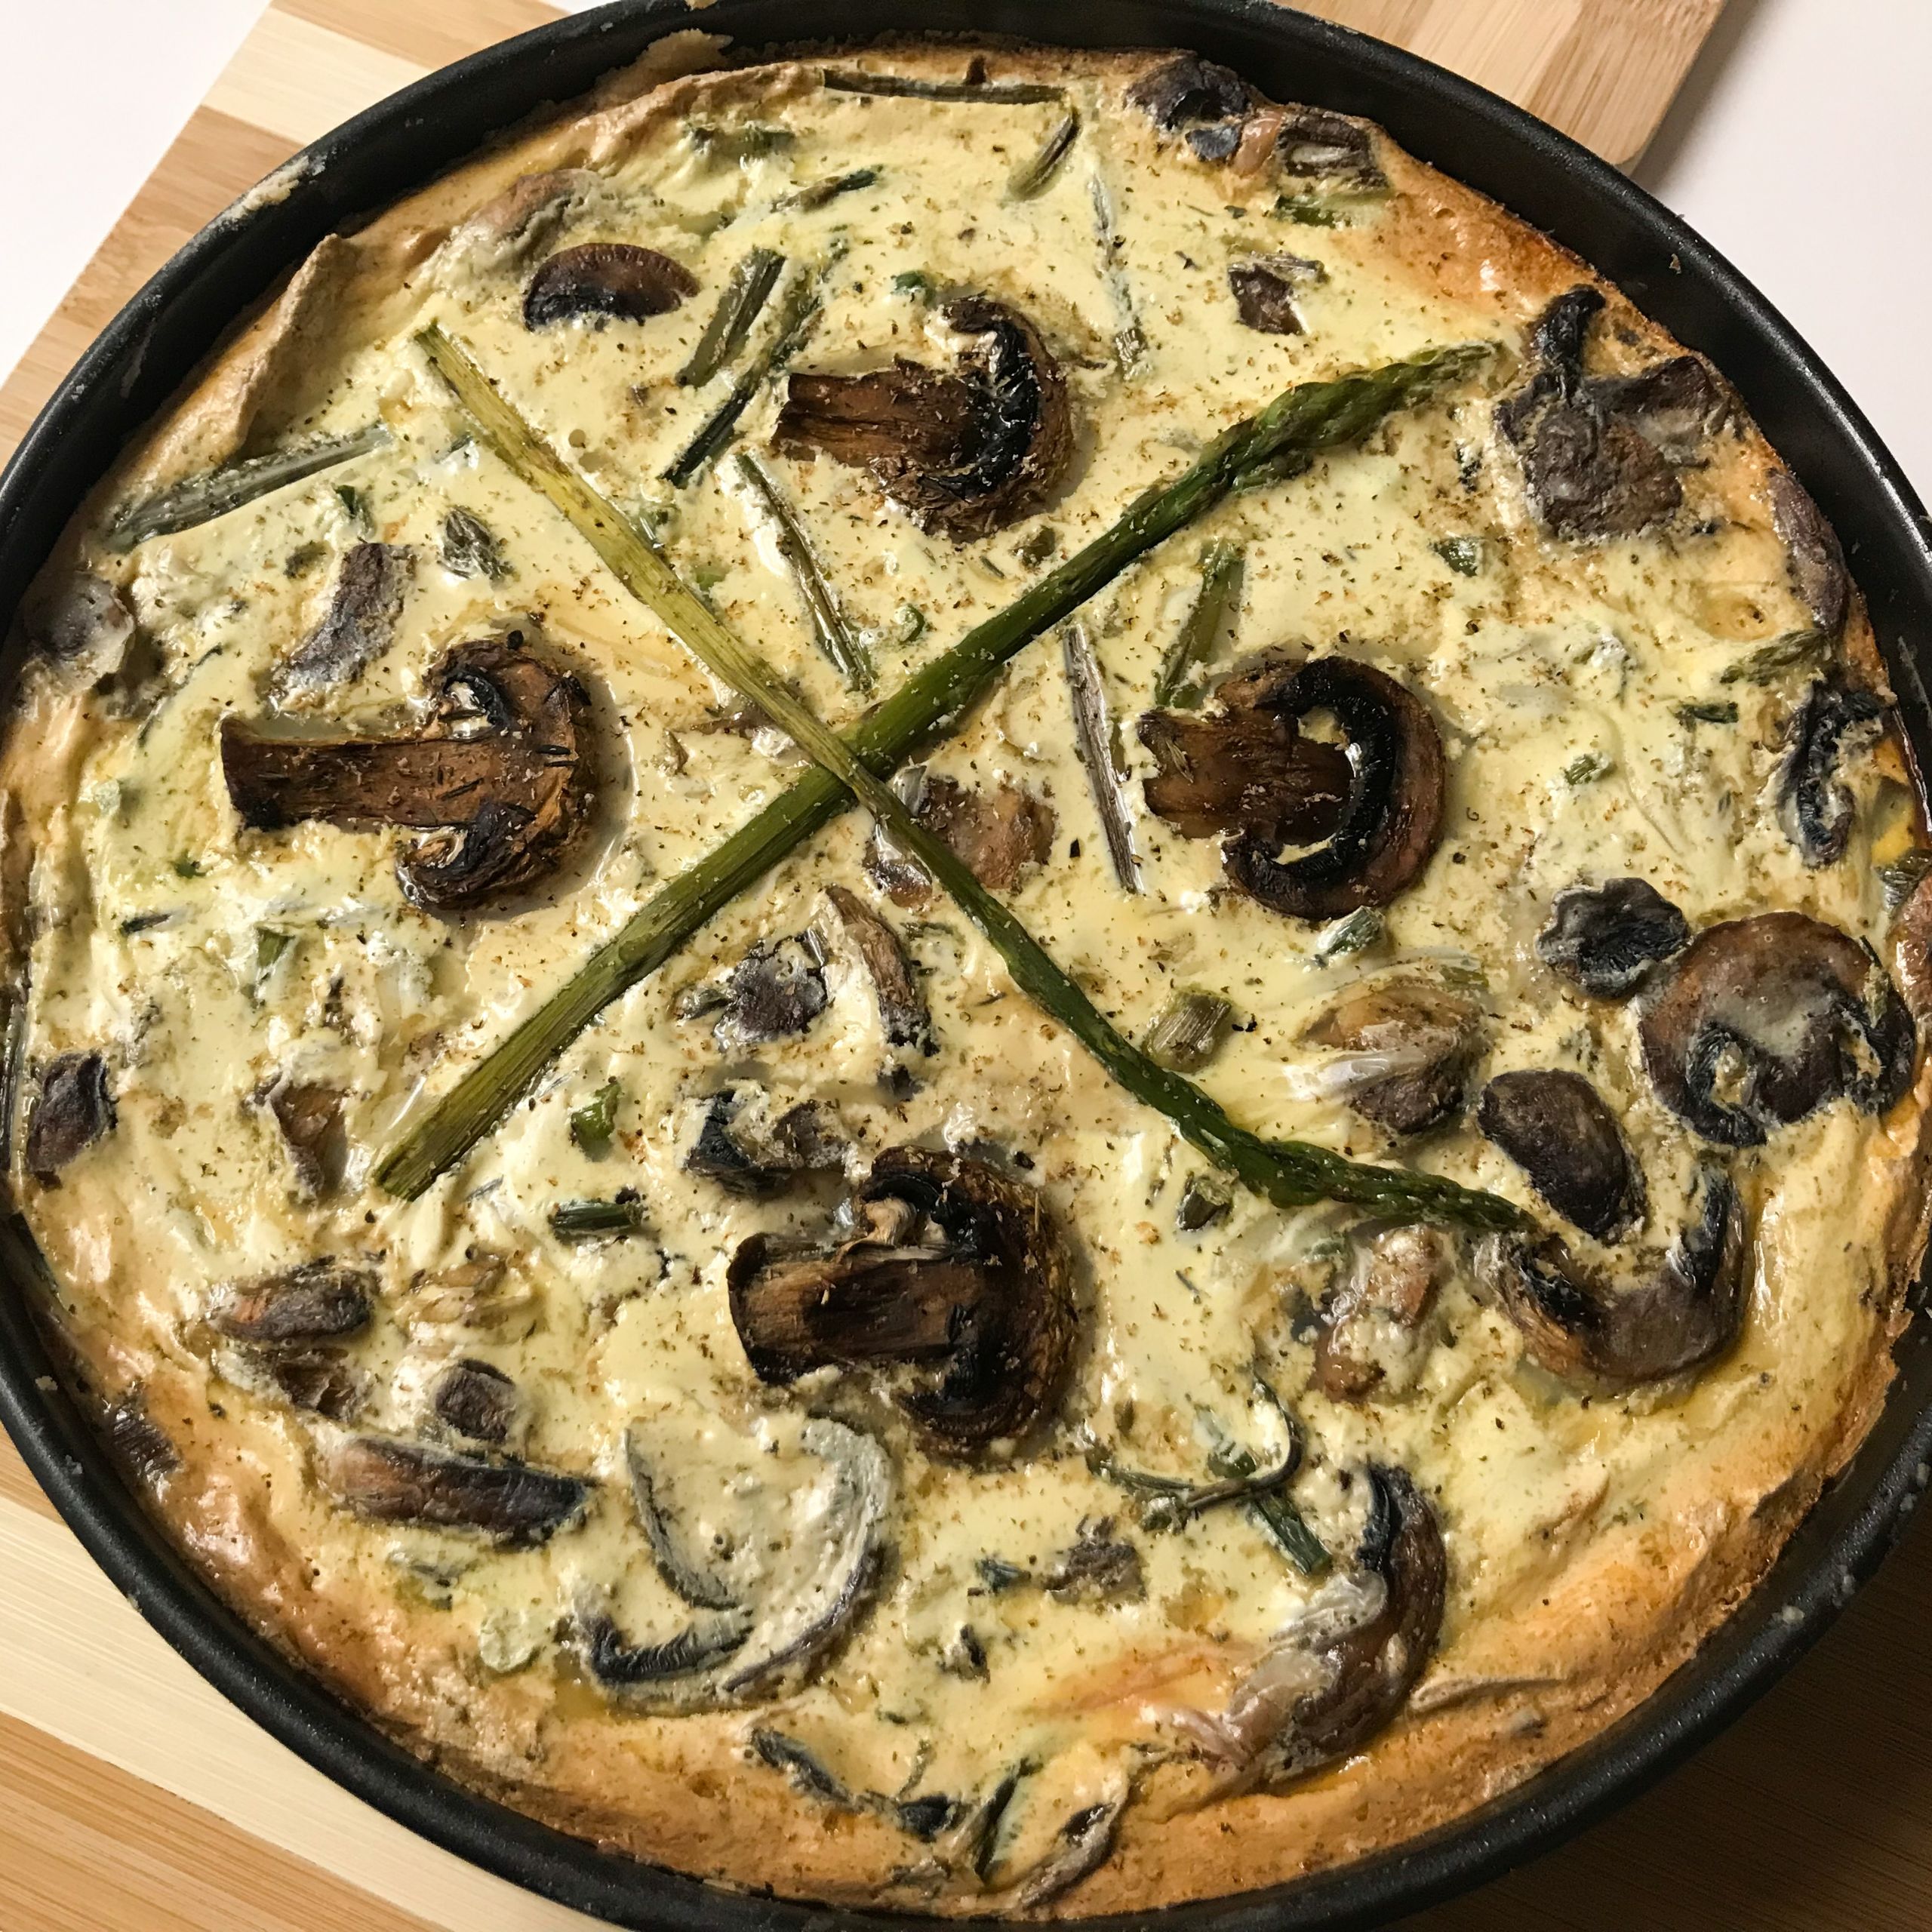 Baked quiche view from above